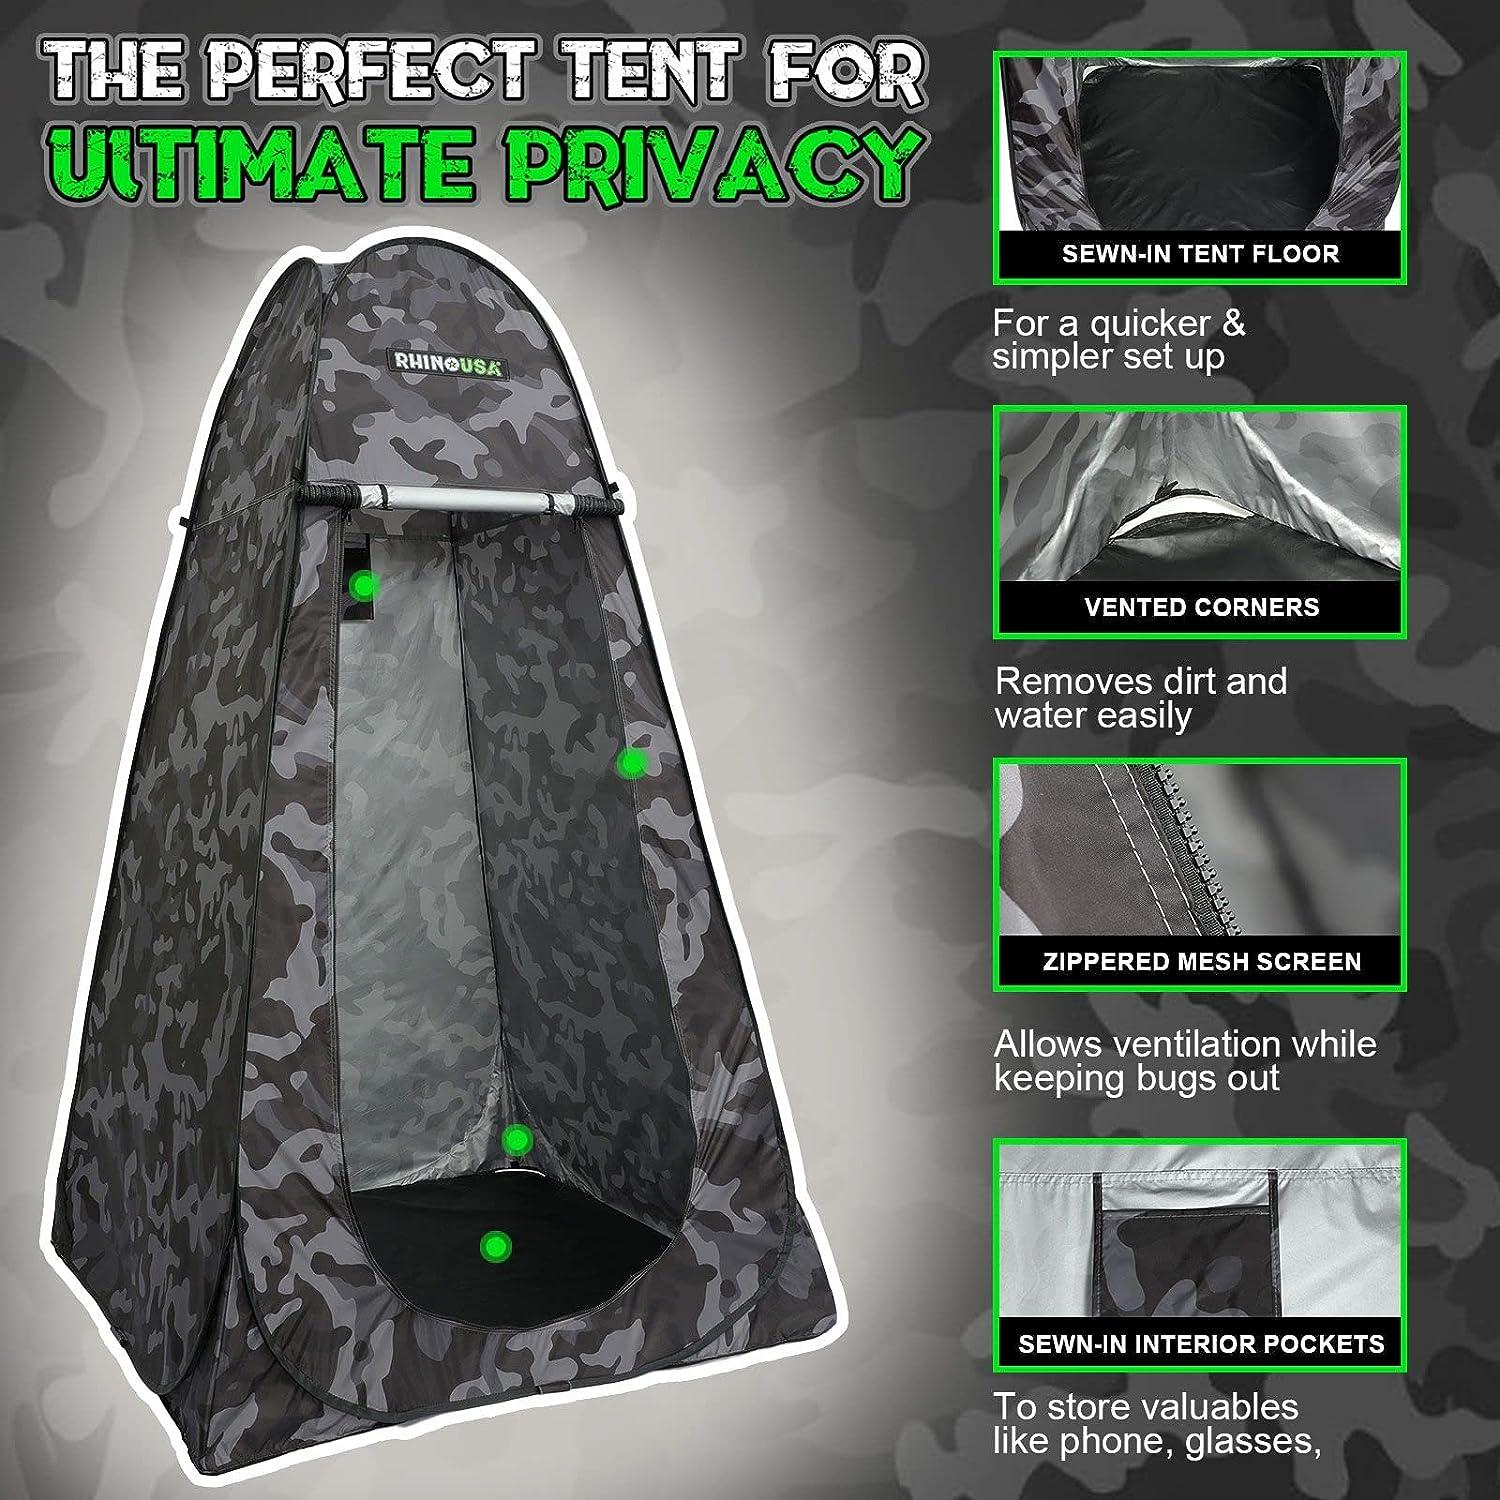 Rhino USA Portable Pop Up Privacy Changing Tent - Ultimate Outdoor